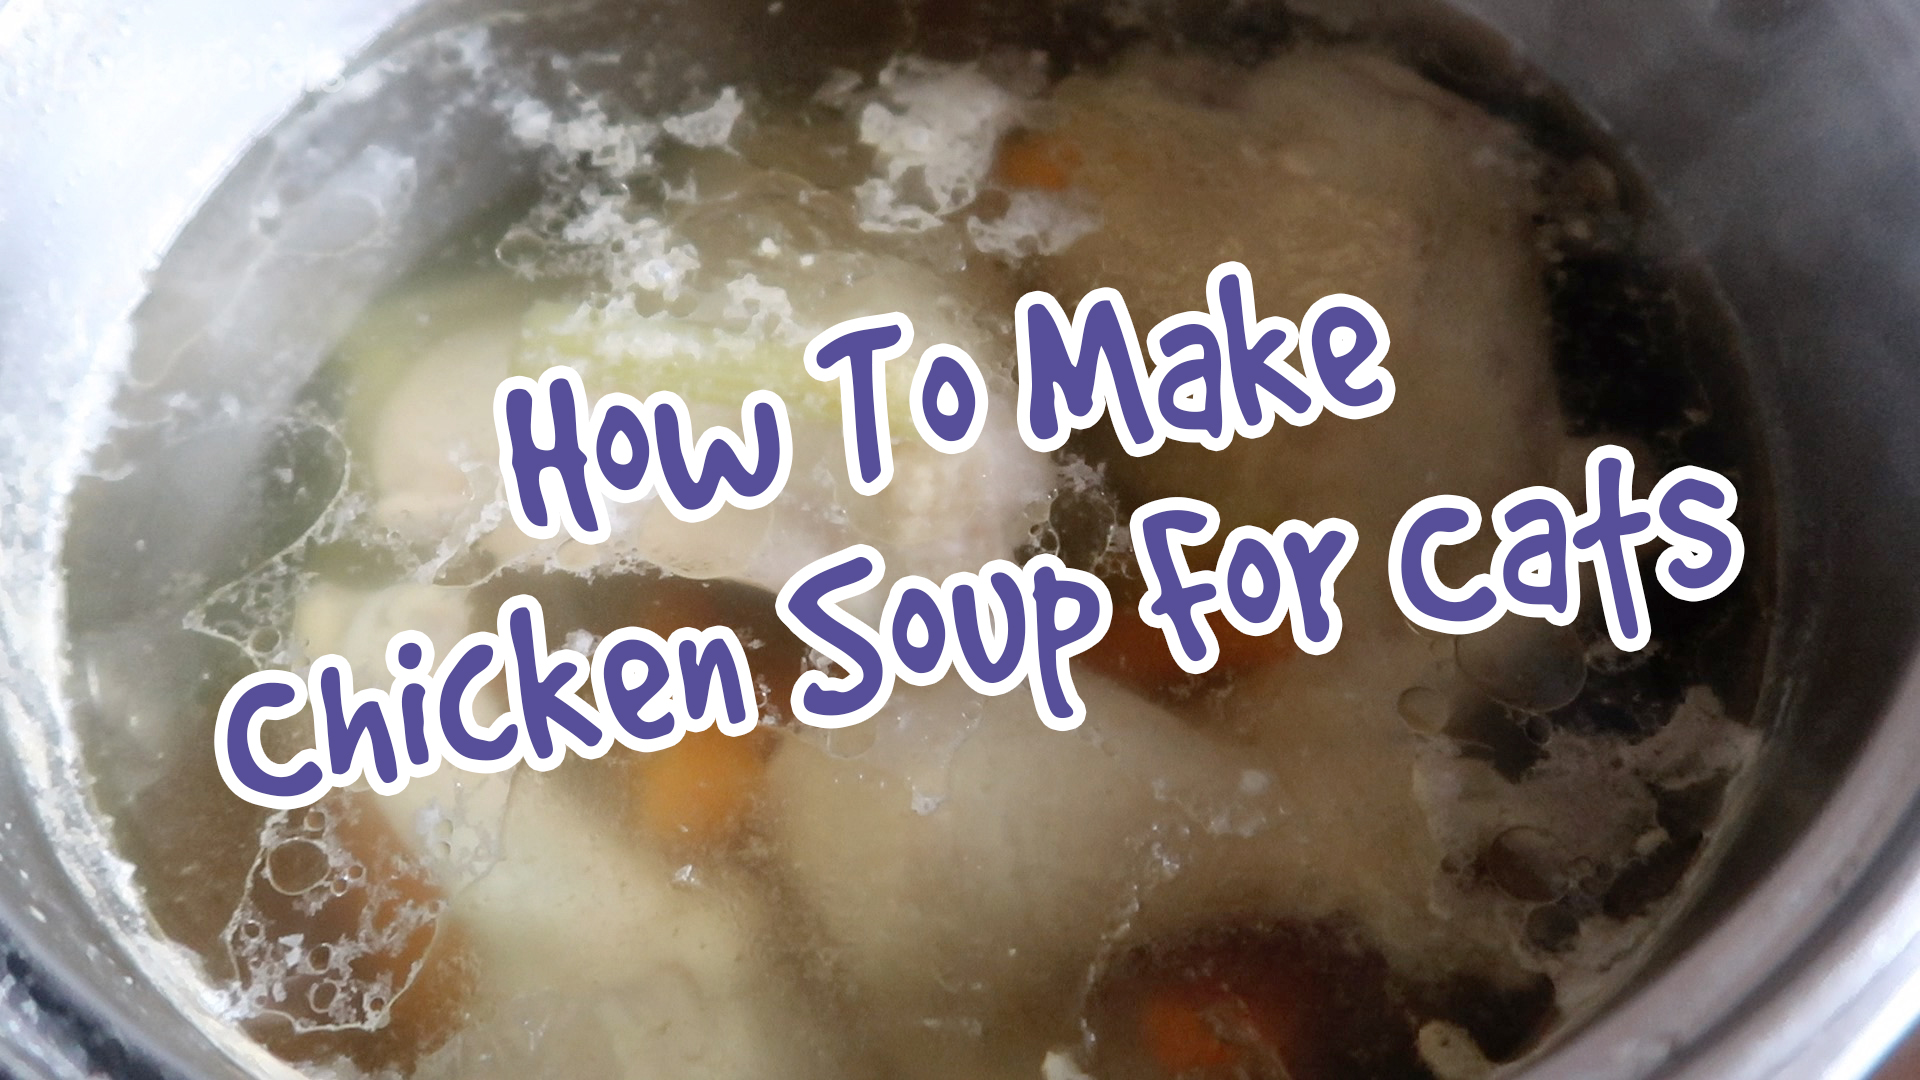 Chicken Soup For Cats THUMB